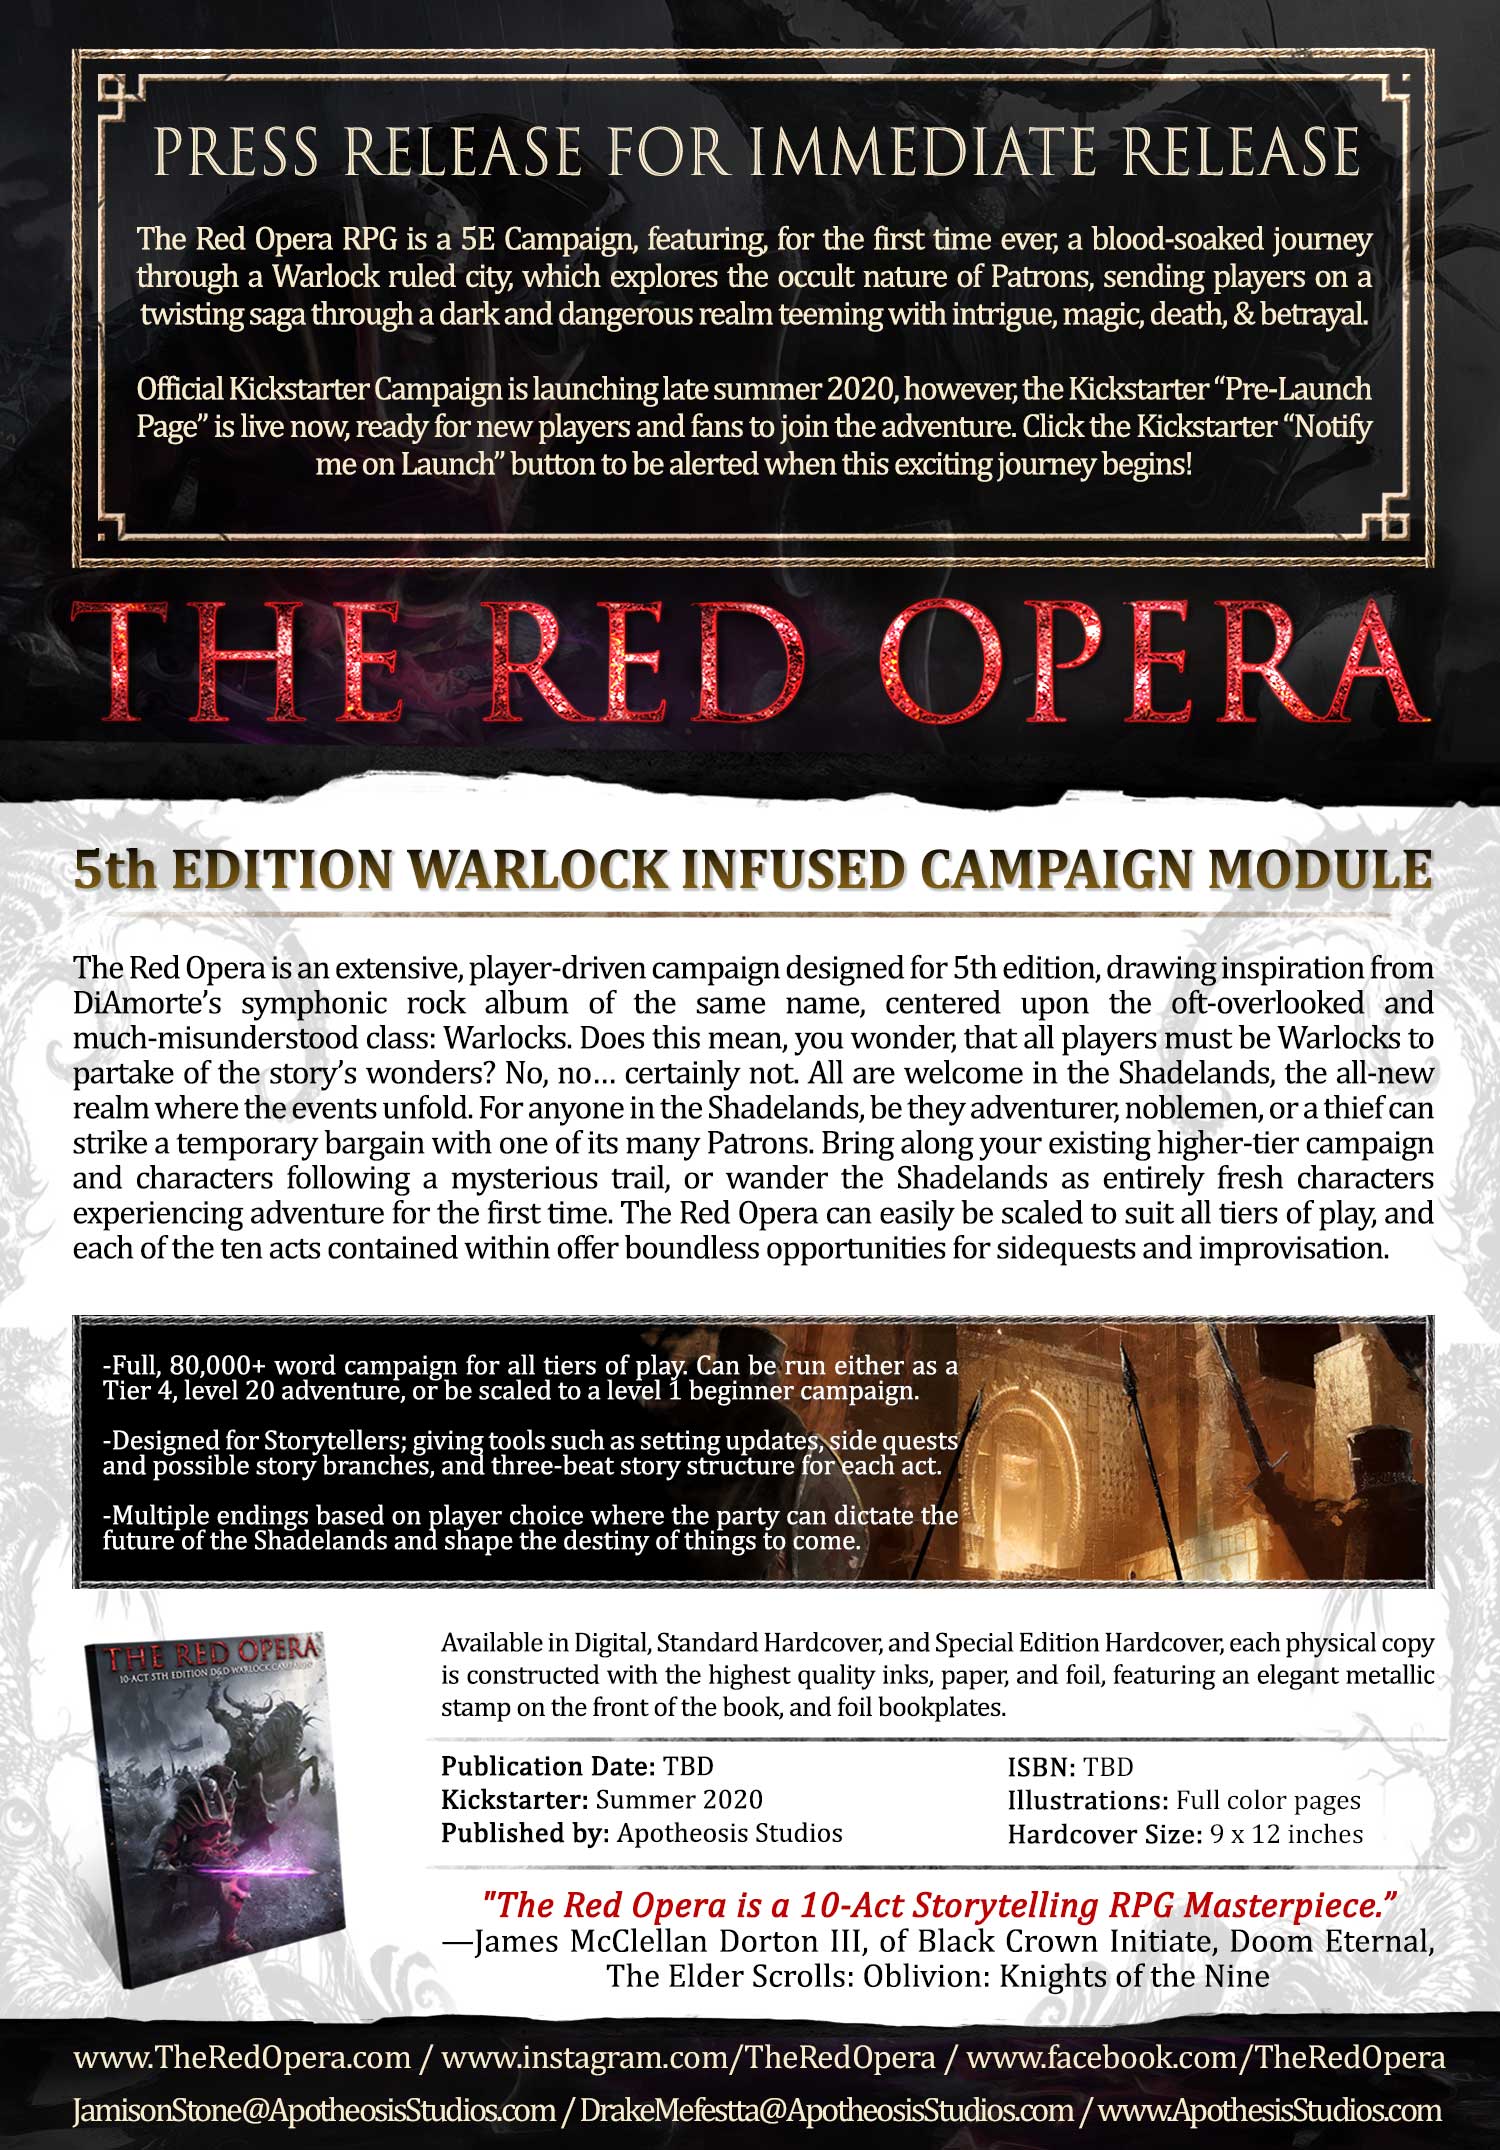 The Red Opera RPG is a 5E Campaign, featuring, for the first time ever, a blood-soaked journey through a Warlock ruled city, teeming with magic, & betrayal.